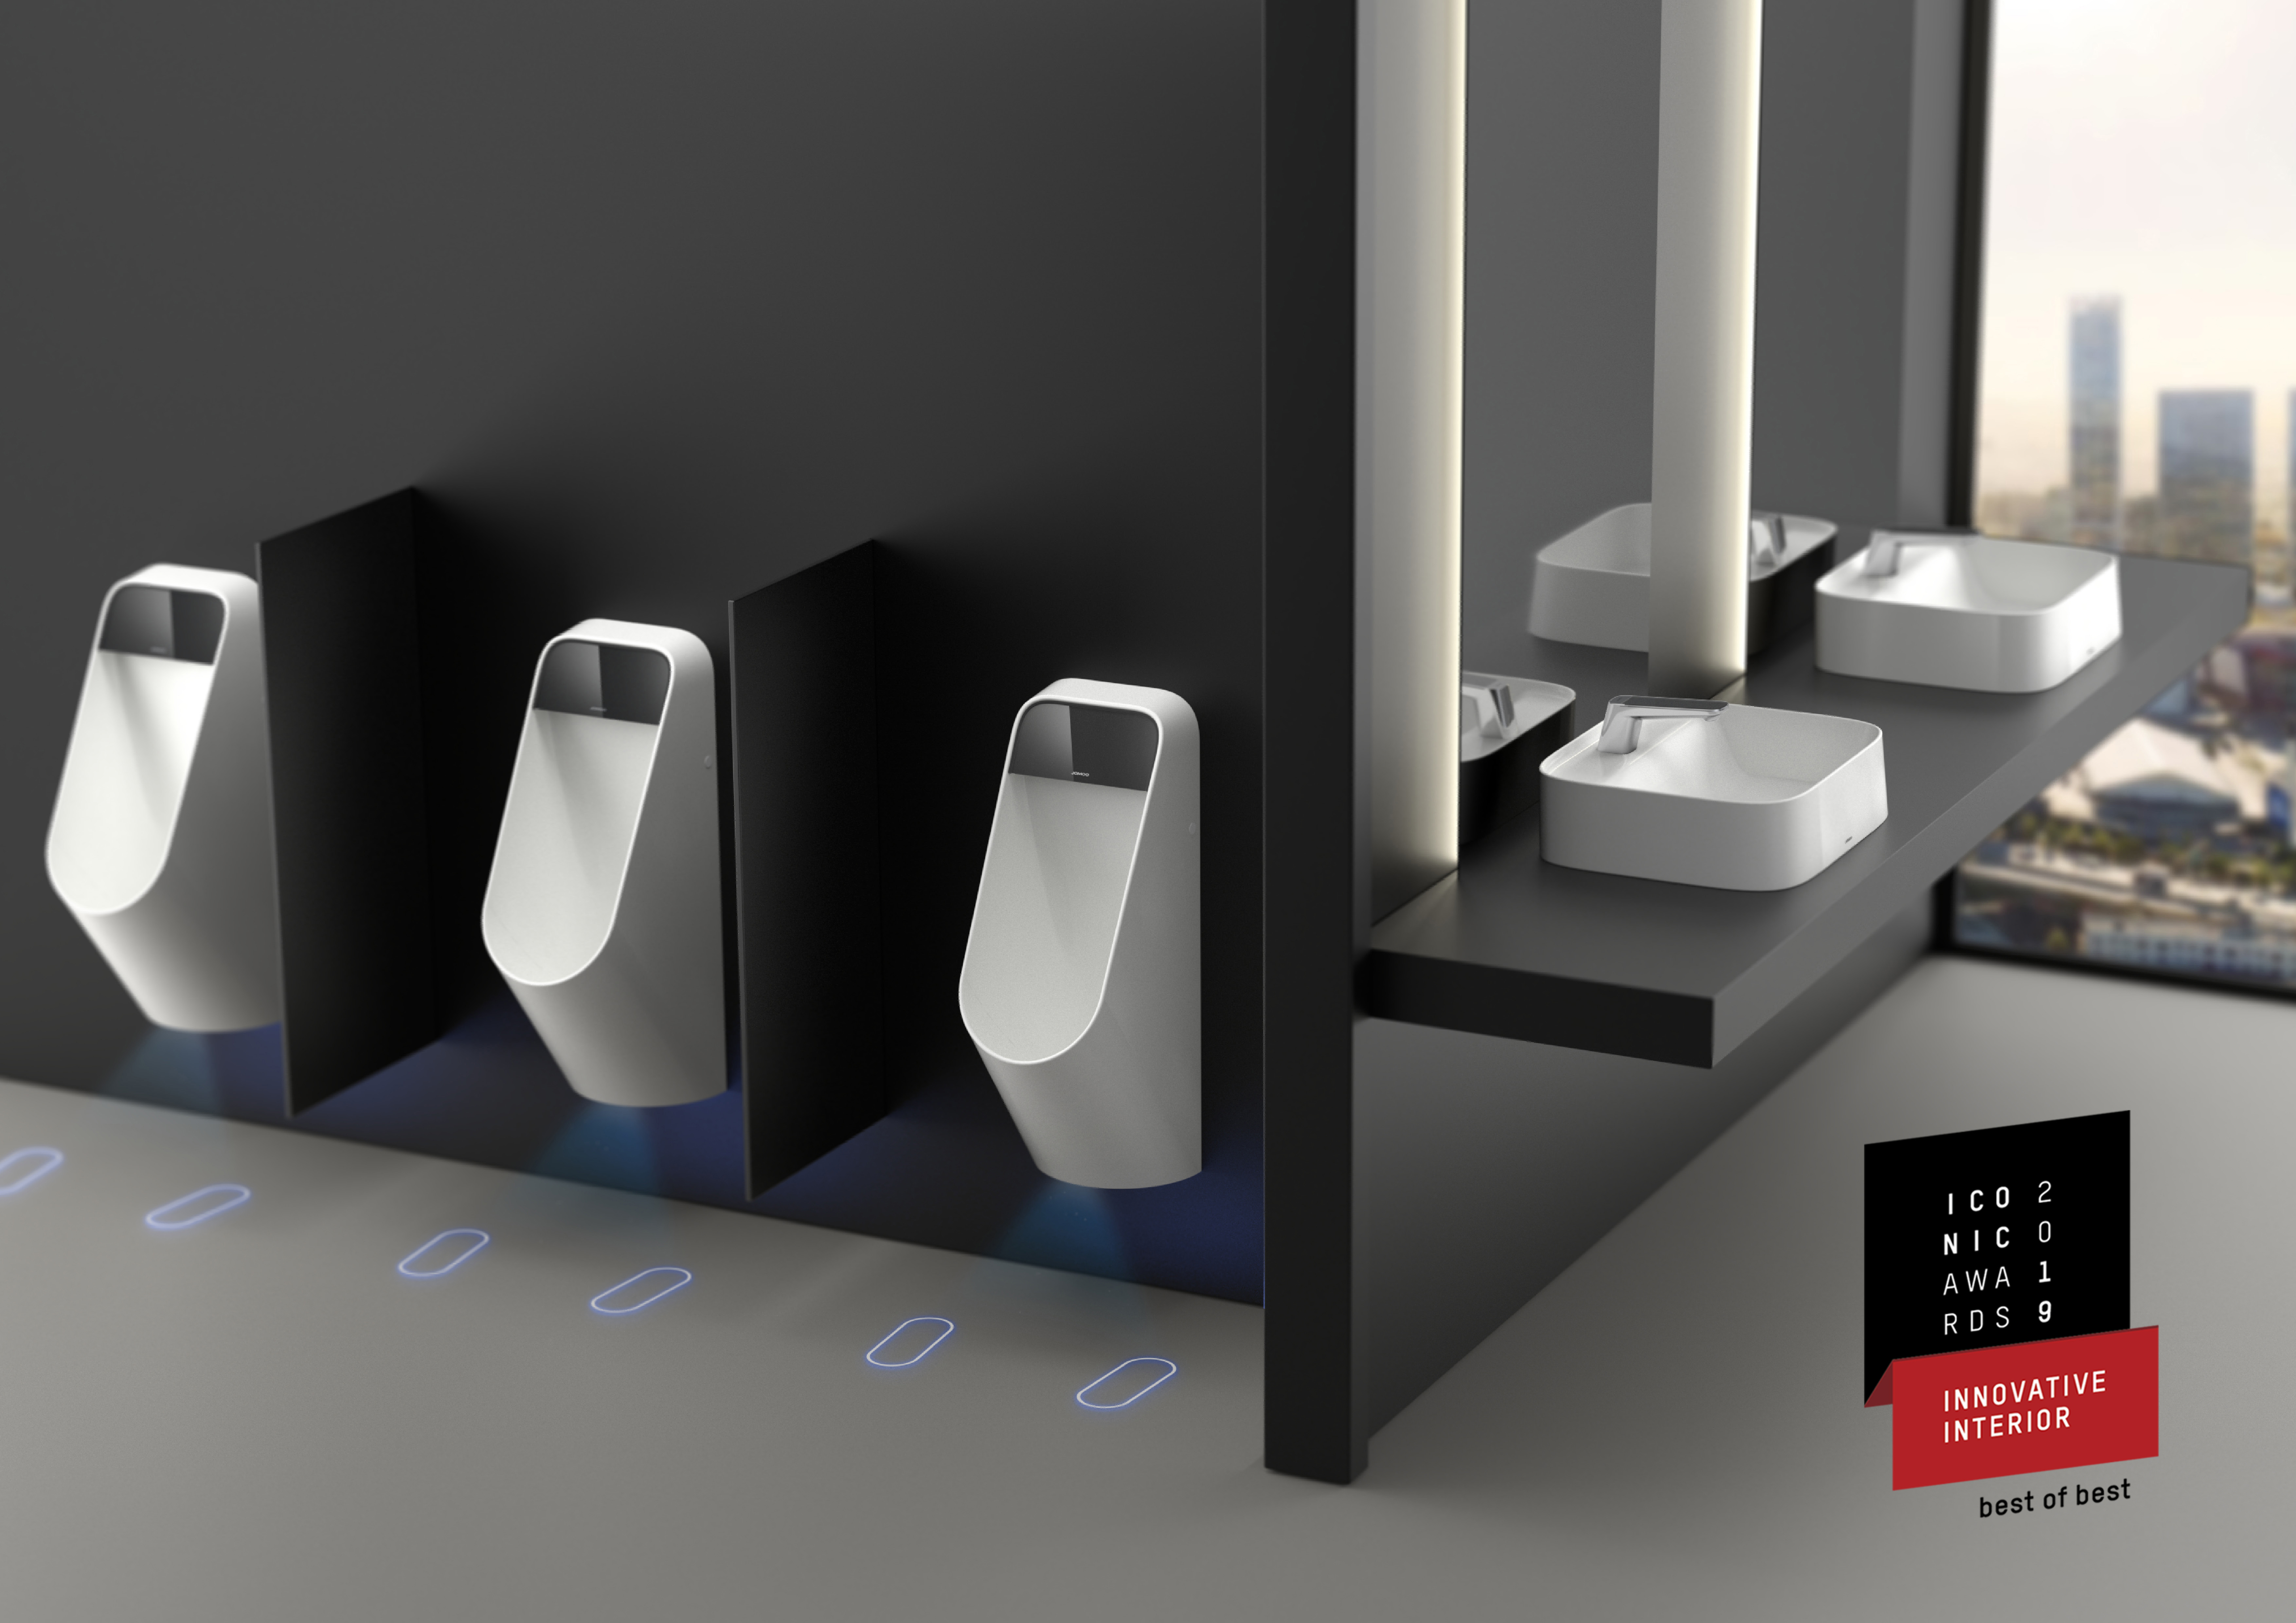 JOMOO public restroom suite SYS-1 was honored the Best of Best of ICONIC AWARDS Innovative Interior2.jpg